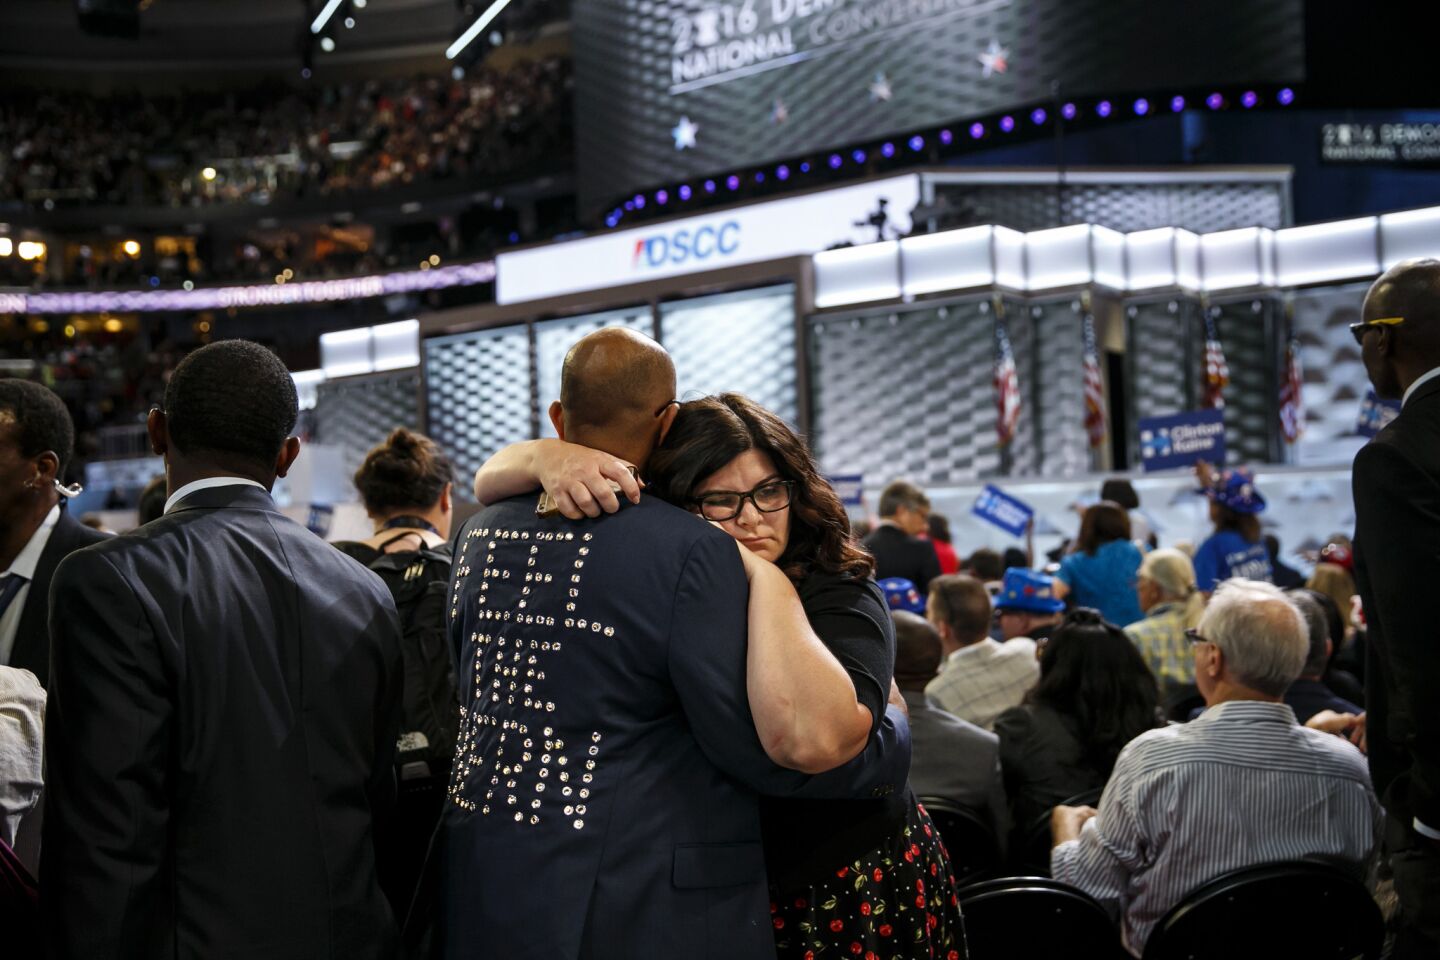 Delegates embrace each other 2016 Democratic National Convention in Philadelphia.